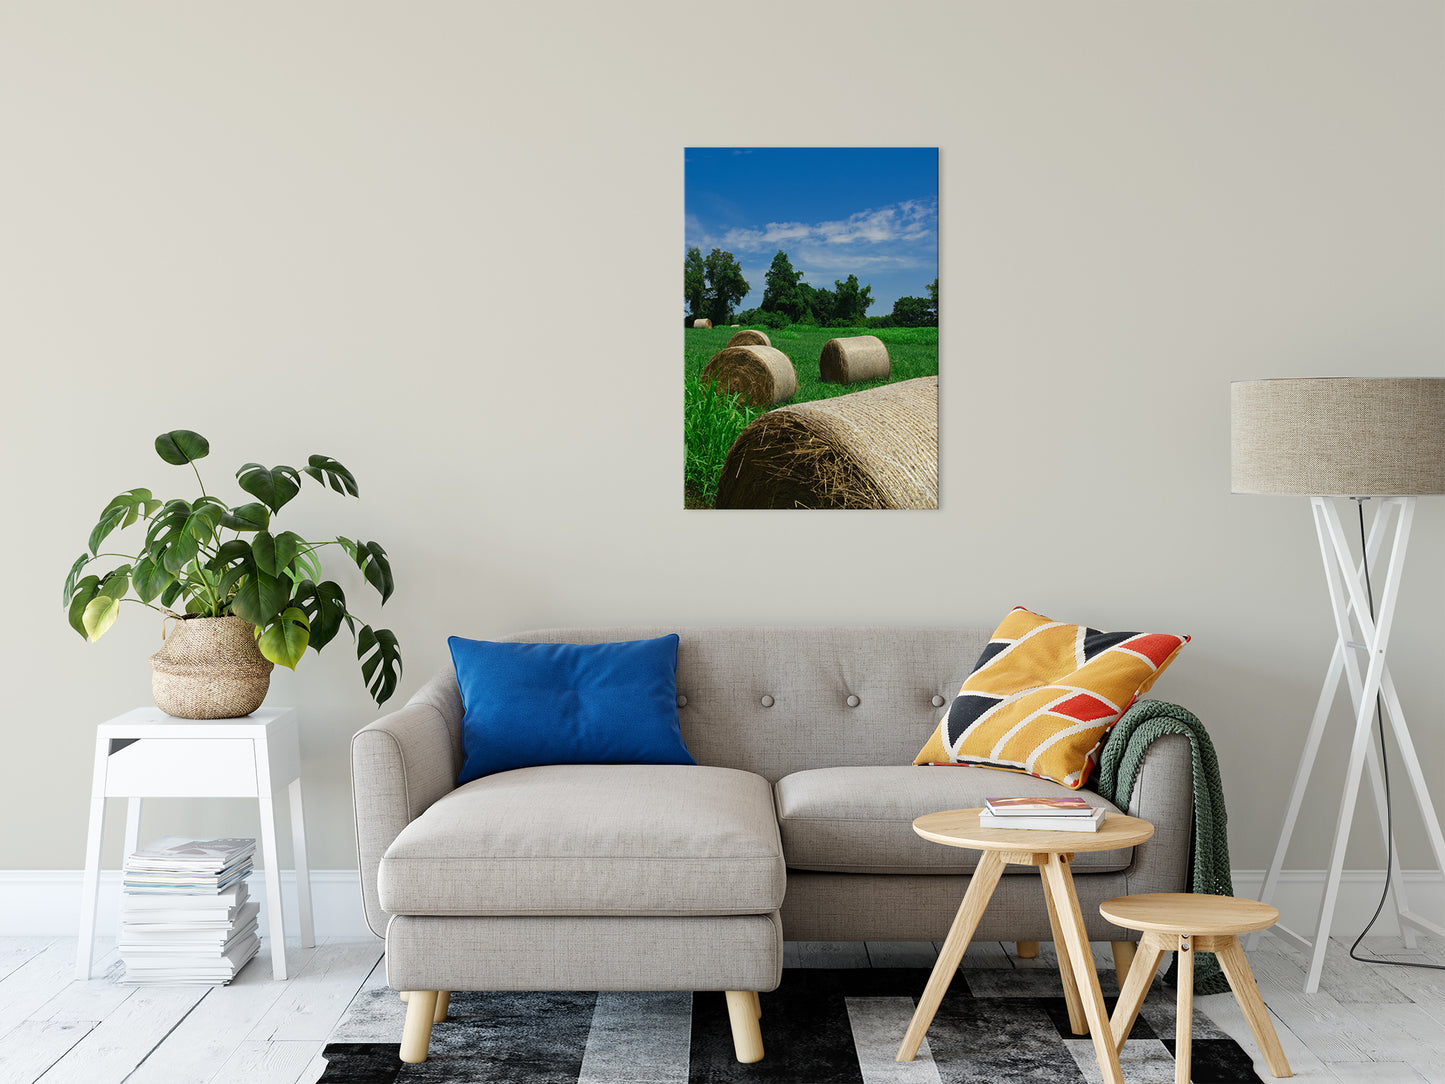 Hay Whatcha Doin in the Field Landscape Photo Fine Art Canvas Wall Art Prints 24" x 36" - PIPAFINEART